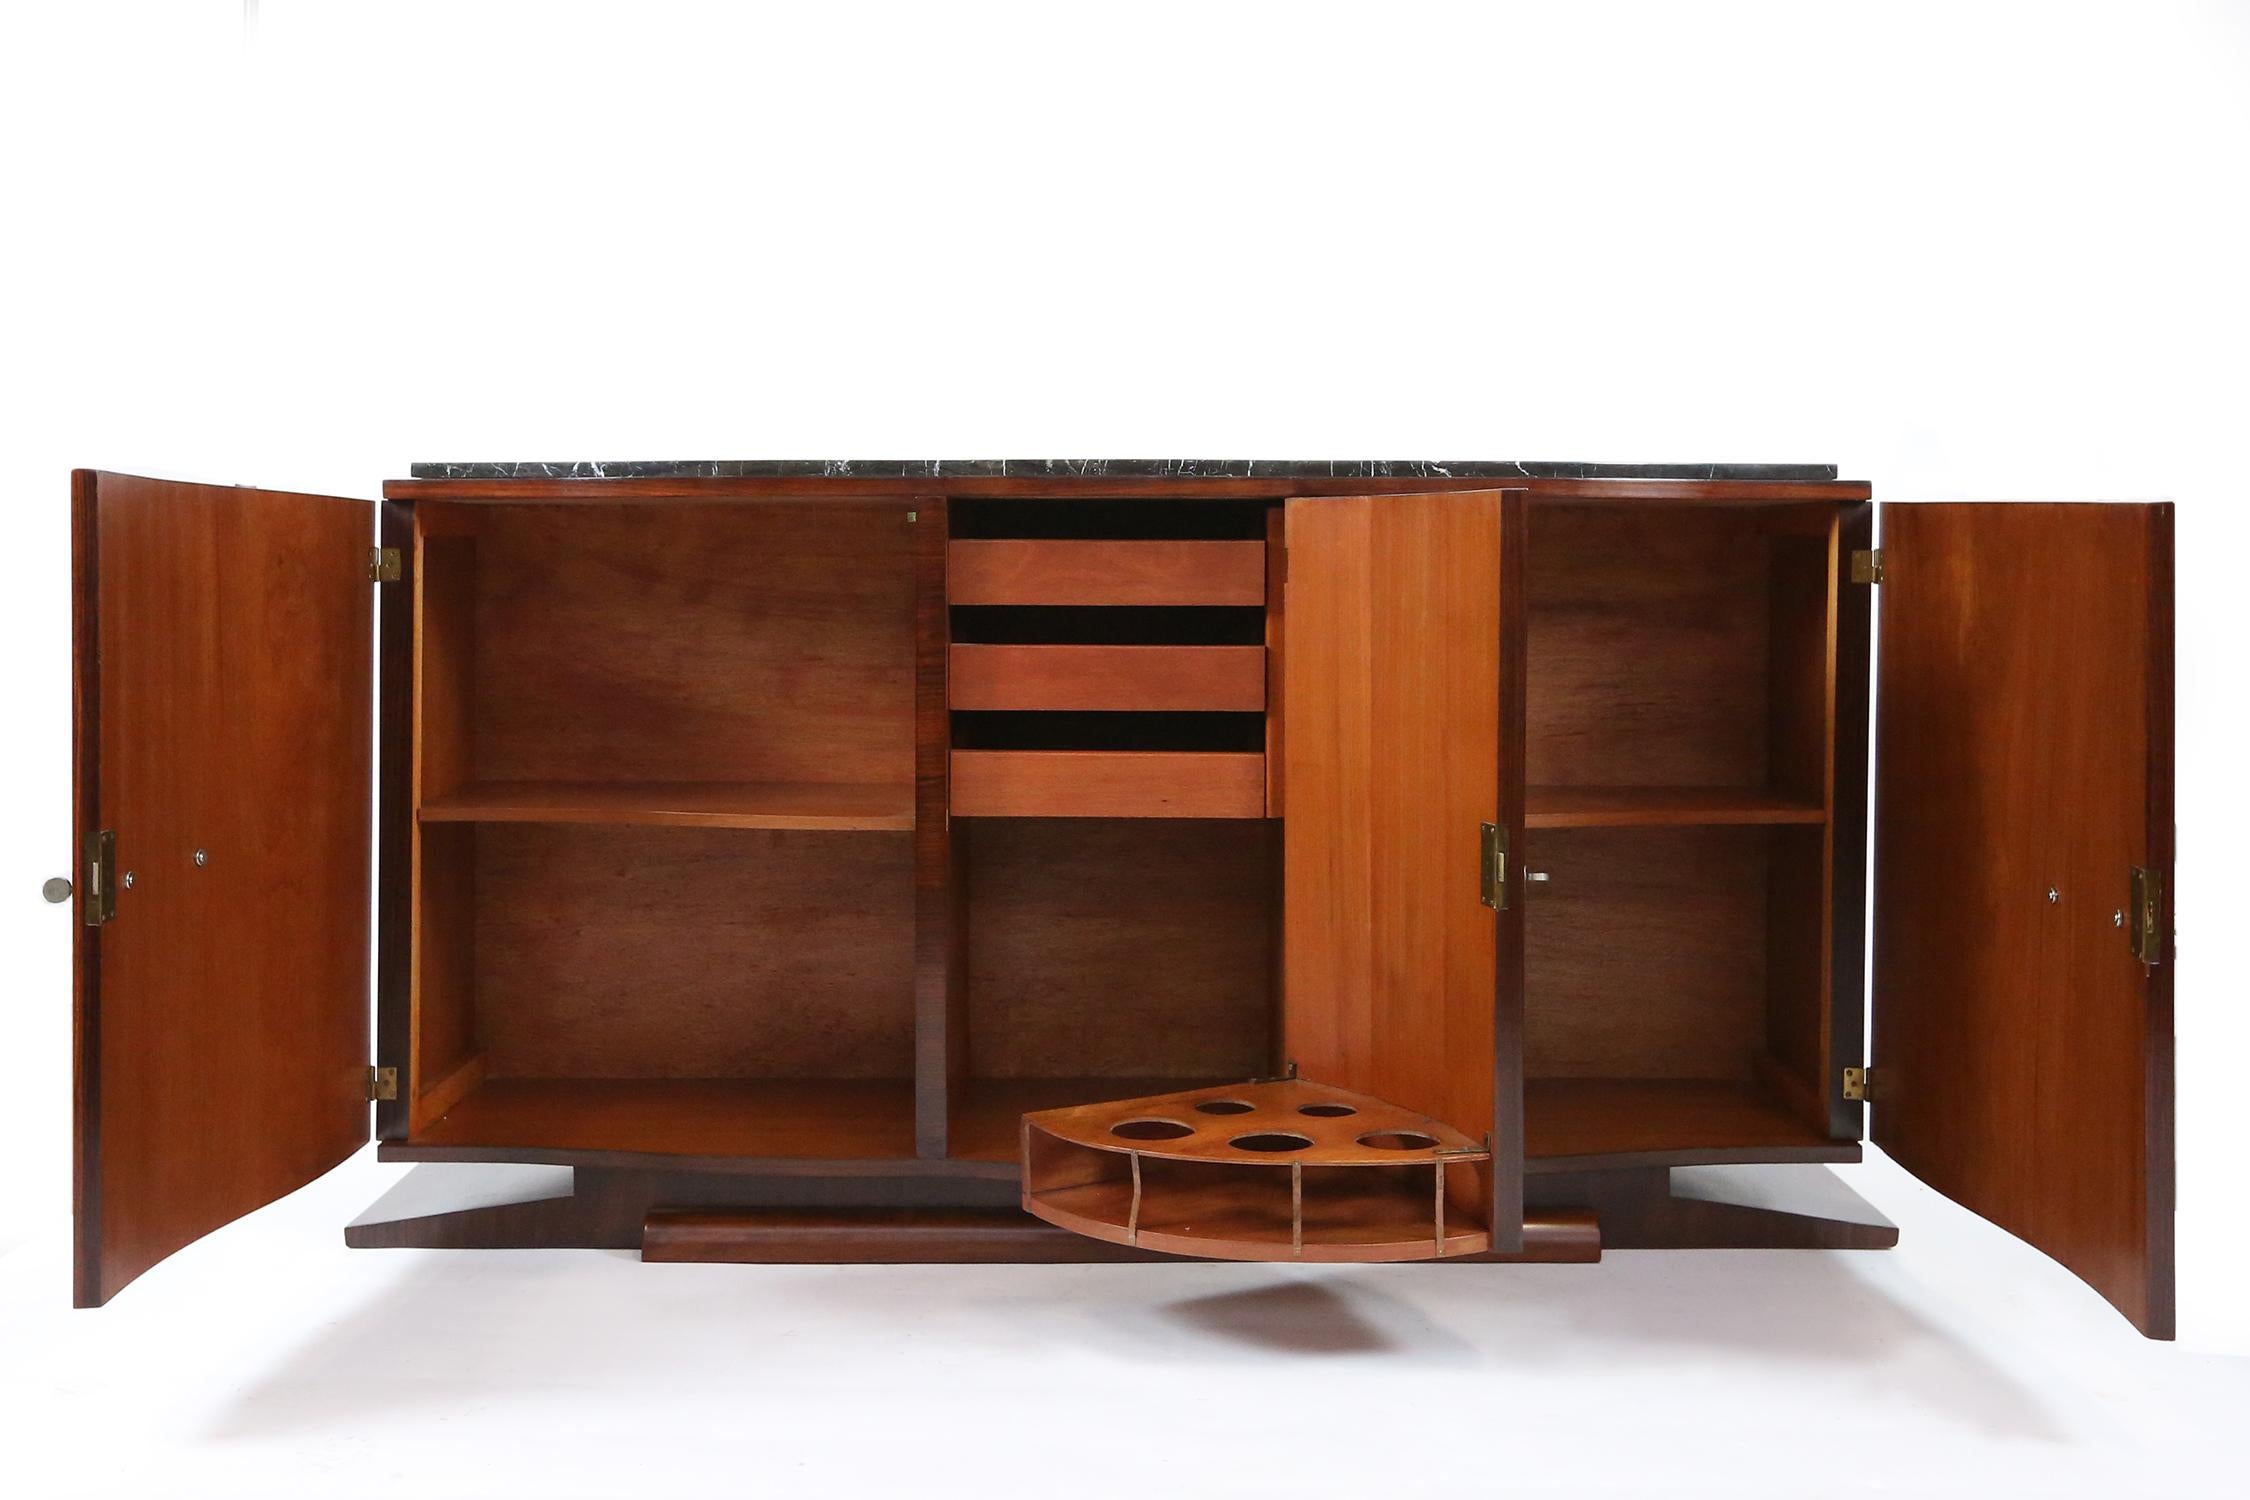 Art-deco sideboard, credenza from 1930, Belgian origin from Atelier De Coene et Frères. Walnut veneer and silver plated keys and handles with a Belgian black marble top. Completely restored with a hand made French polish.